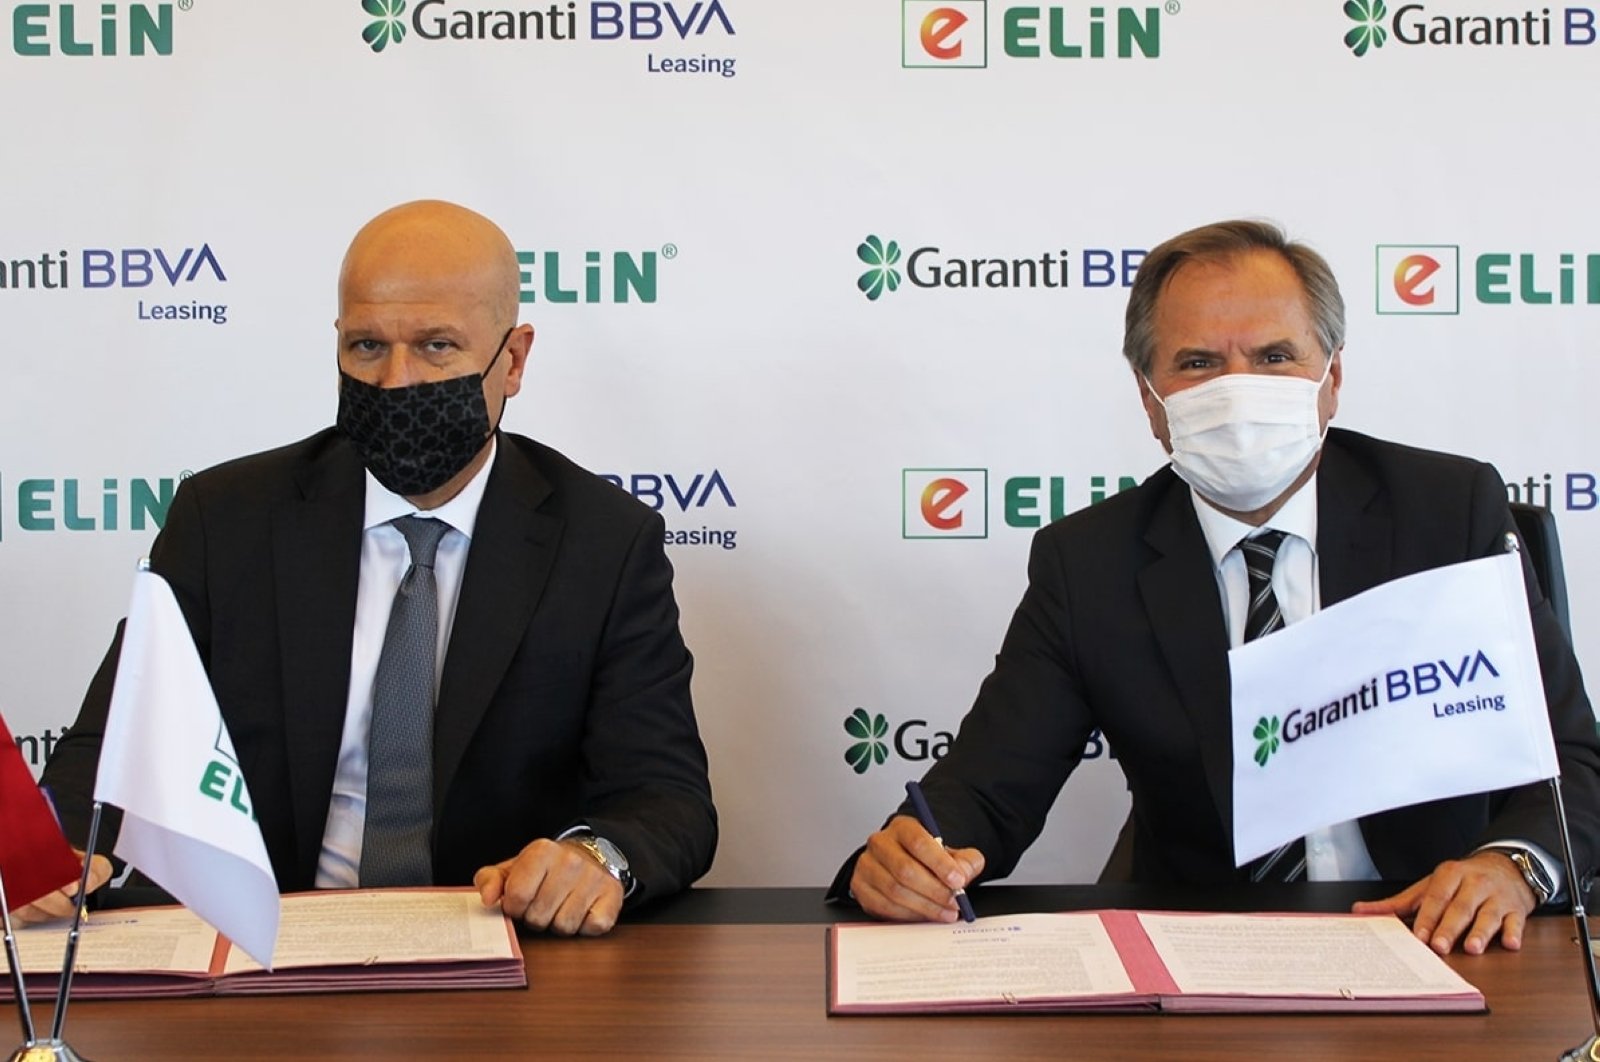 Garanti BBVA Leasing Chief Executive Ünal Gökmen (R) and Elin Energy Board Member Murat Karakeçili pose for a photo before signing the cooperation protocol in Istanbul, Sept. 14, 2020. (AA Photo)